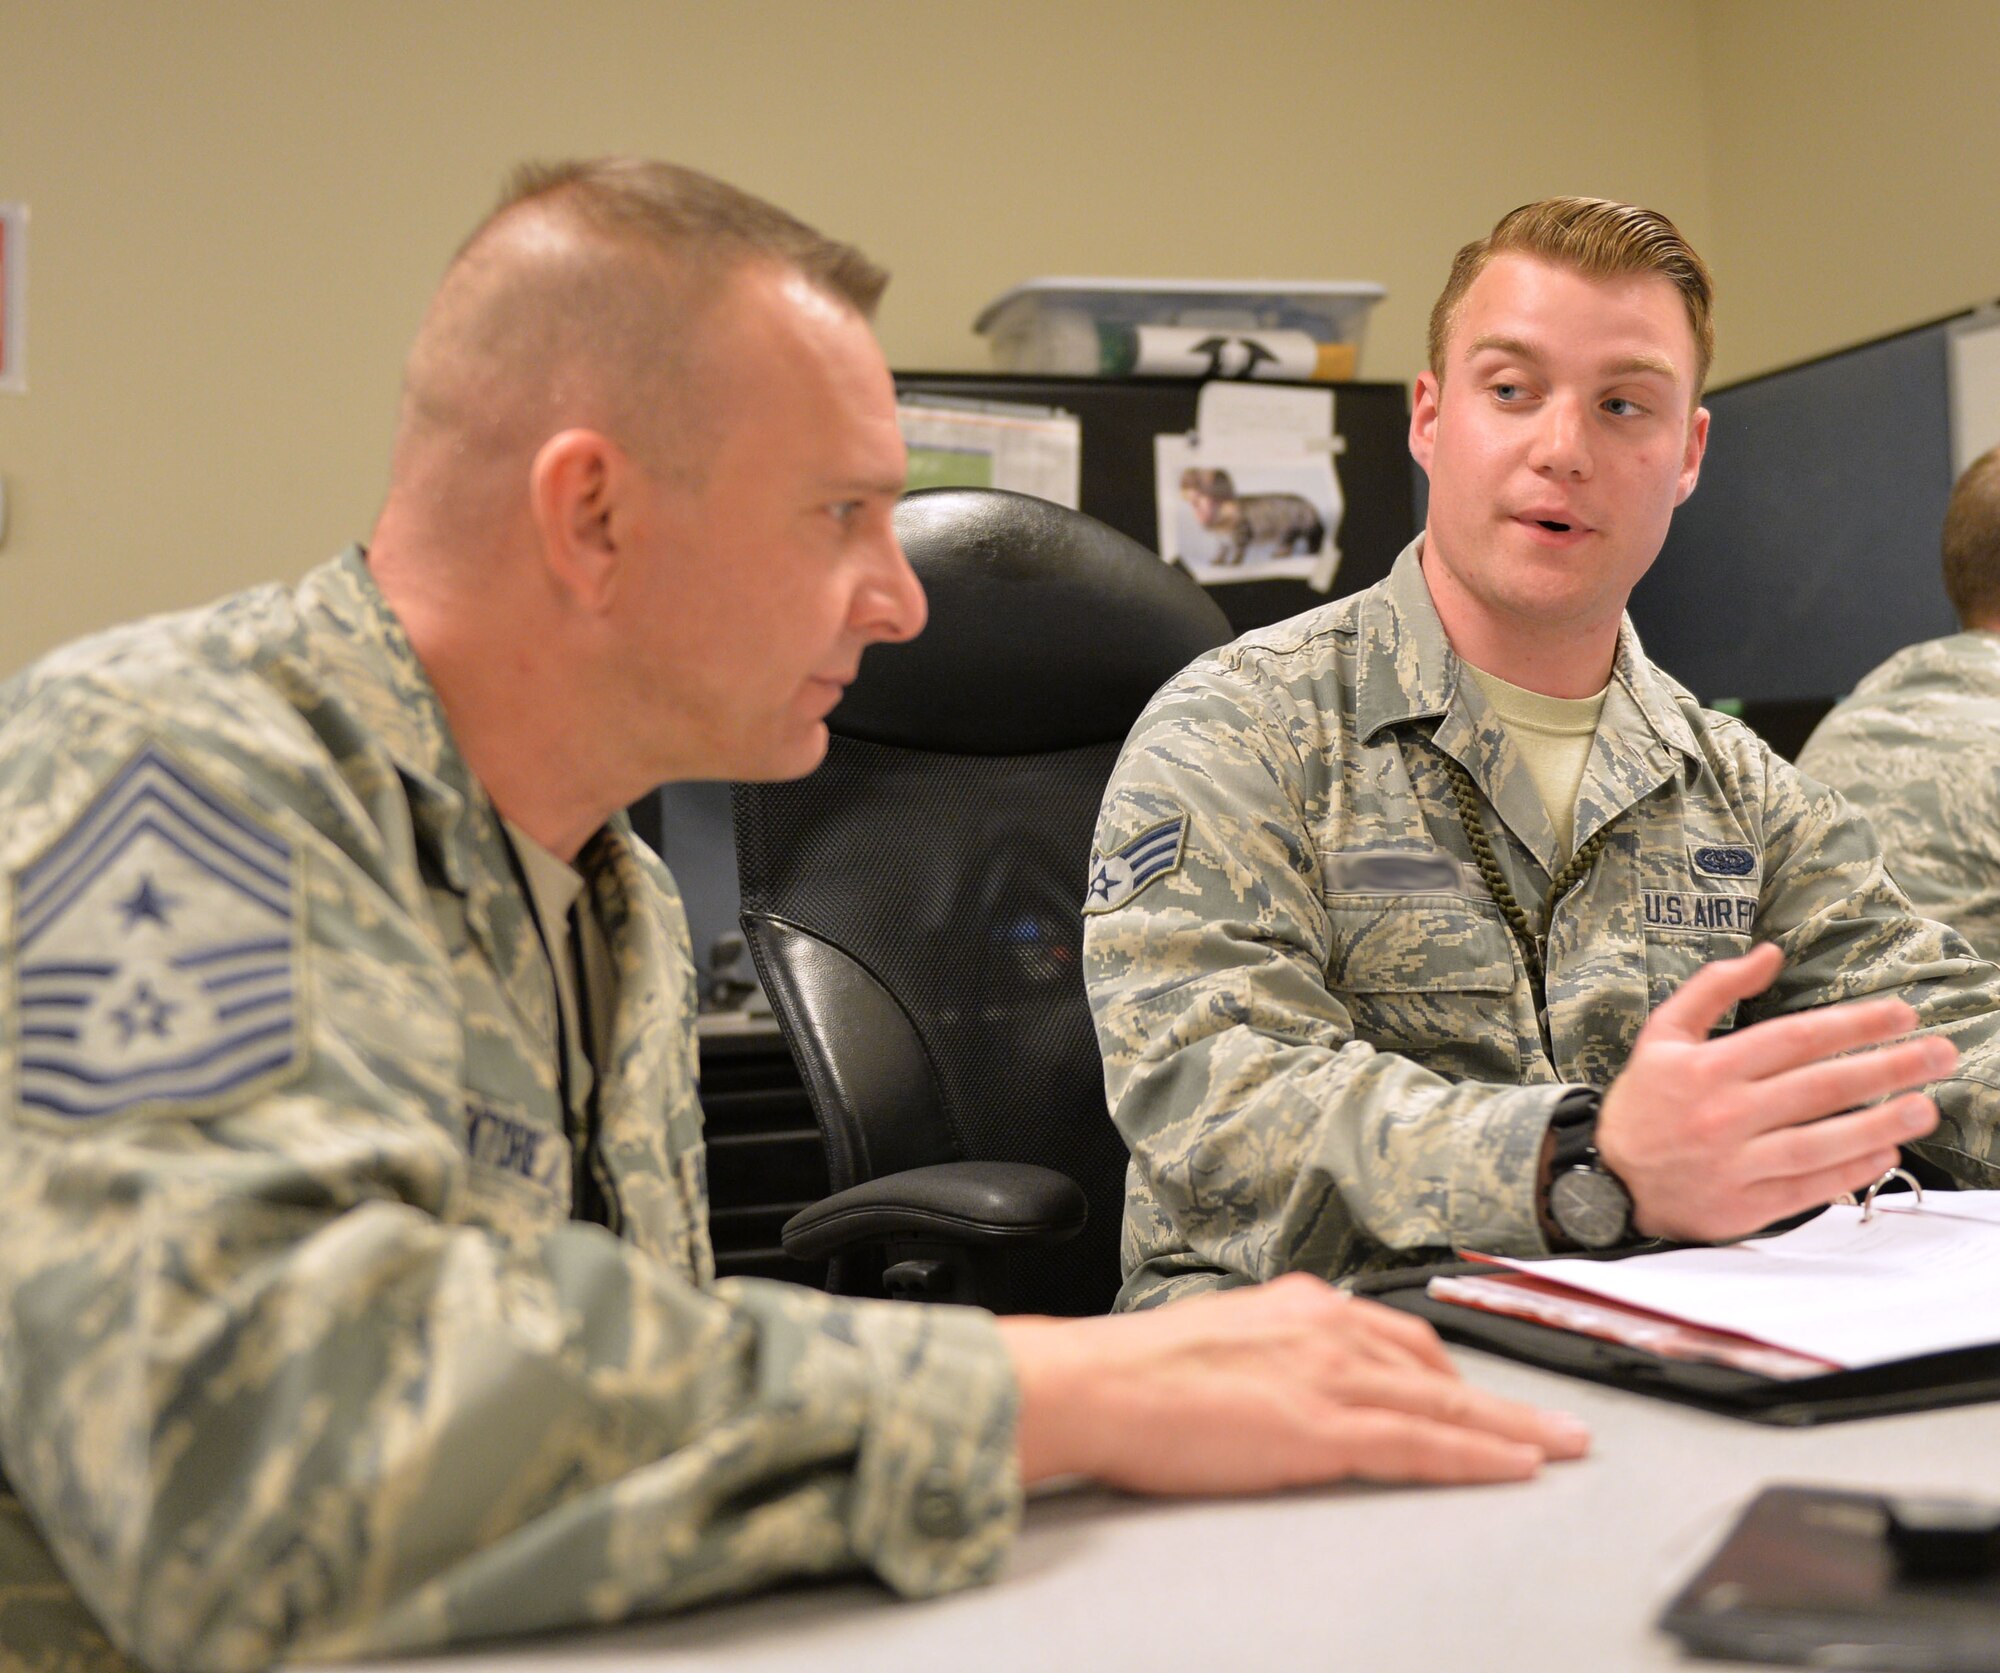 Chief Master Sgt. Michael Ditore, 432nd Wing/432nd Air Expeditionary Wing command chief, left, listens as Senior Airman Robert, 432nd Aircraft Communications Maintenance Squadron ground control station communications mechanic, explains how to fill out post-inspection paperwork Feb. 11, 2016, at Creech Air Force Base, Nevada. As a part of the communications squadron, Cameron is responsible for performing inspections on the ground control station. (U.S. Air Force photo by Senior Airman Christian Clausen/Released)

